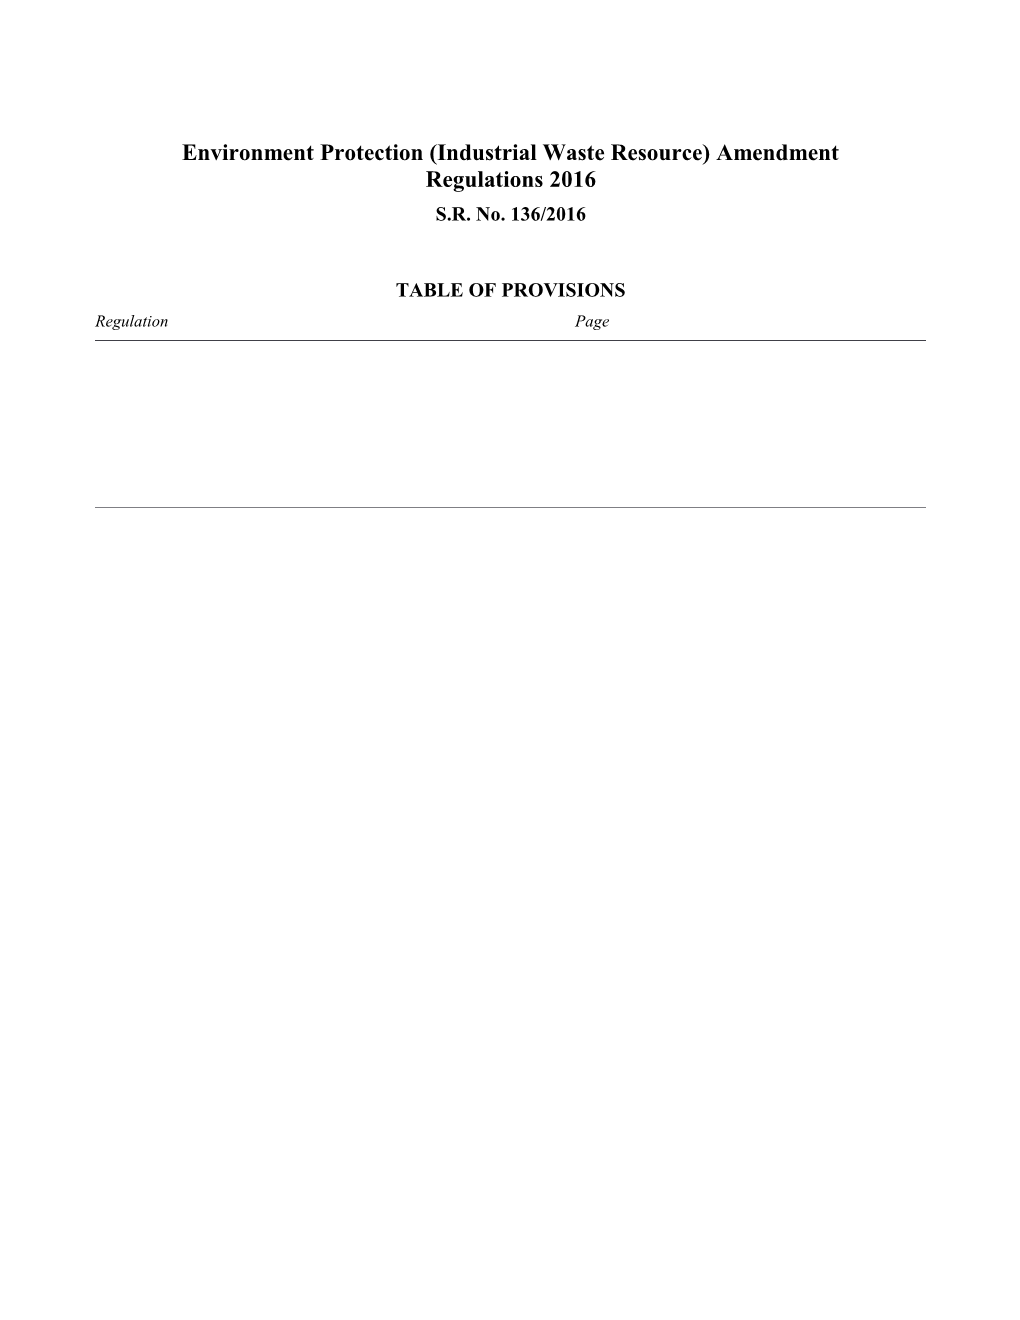 Environment Protection (Industrial Waste Resource) Amendment Regulations 2016